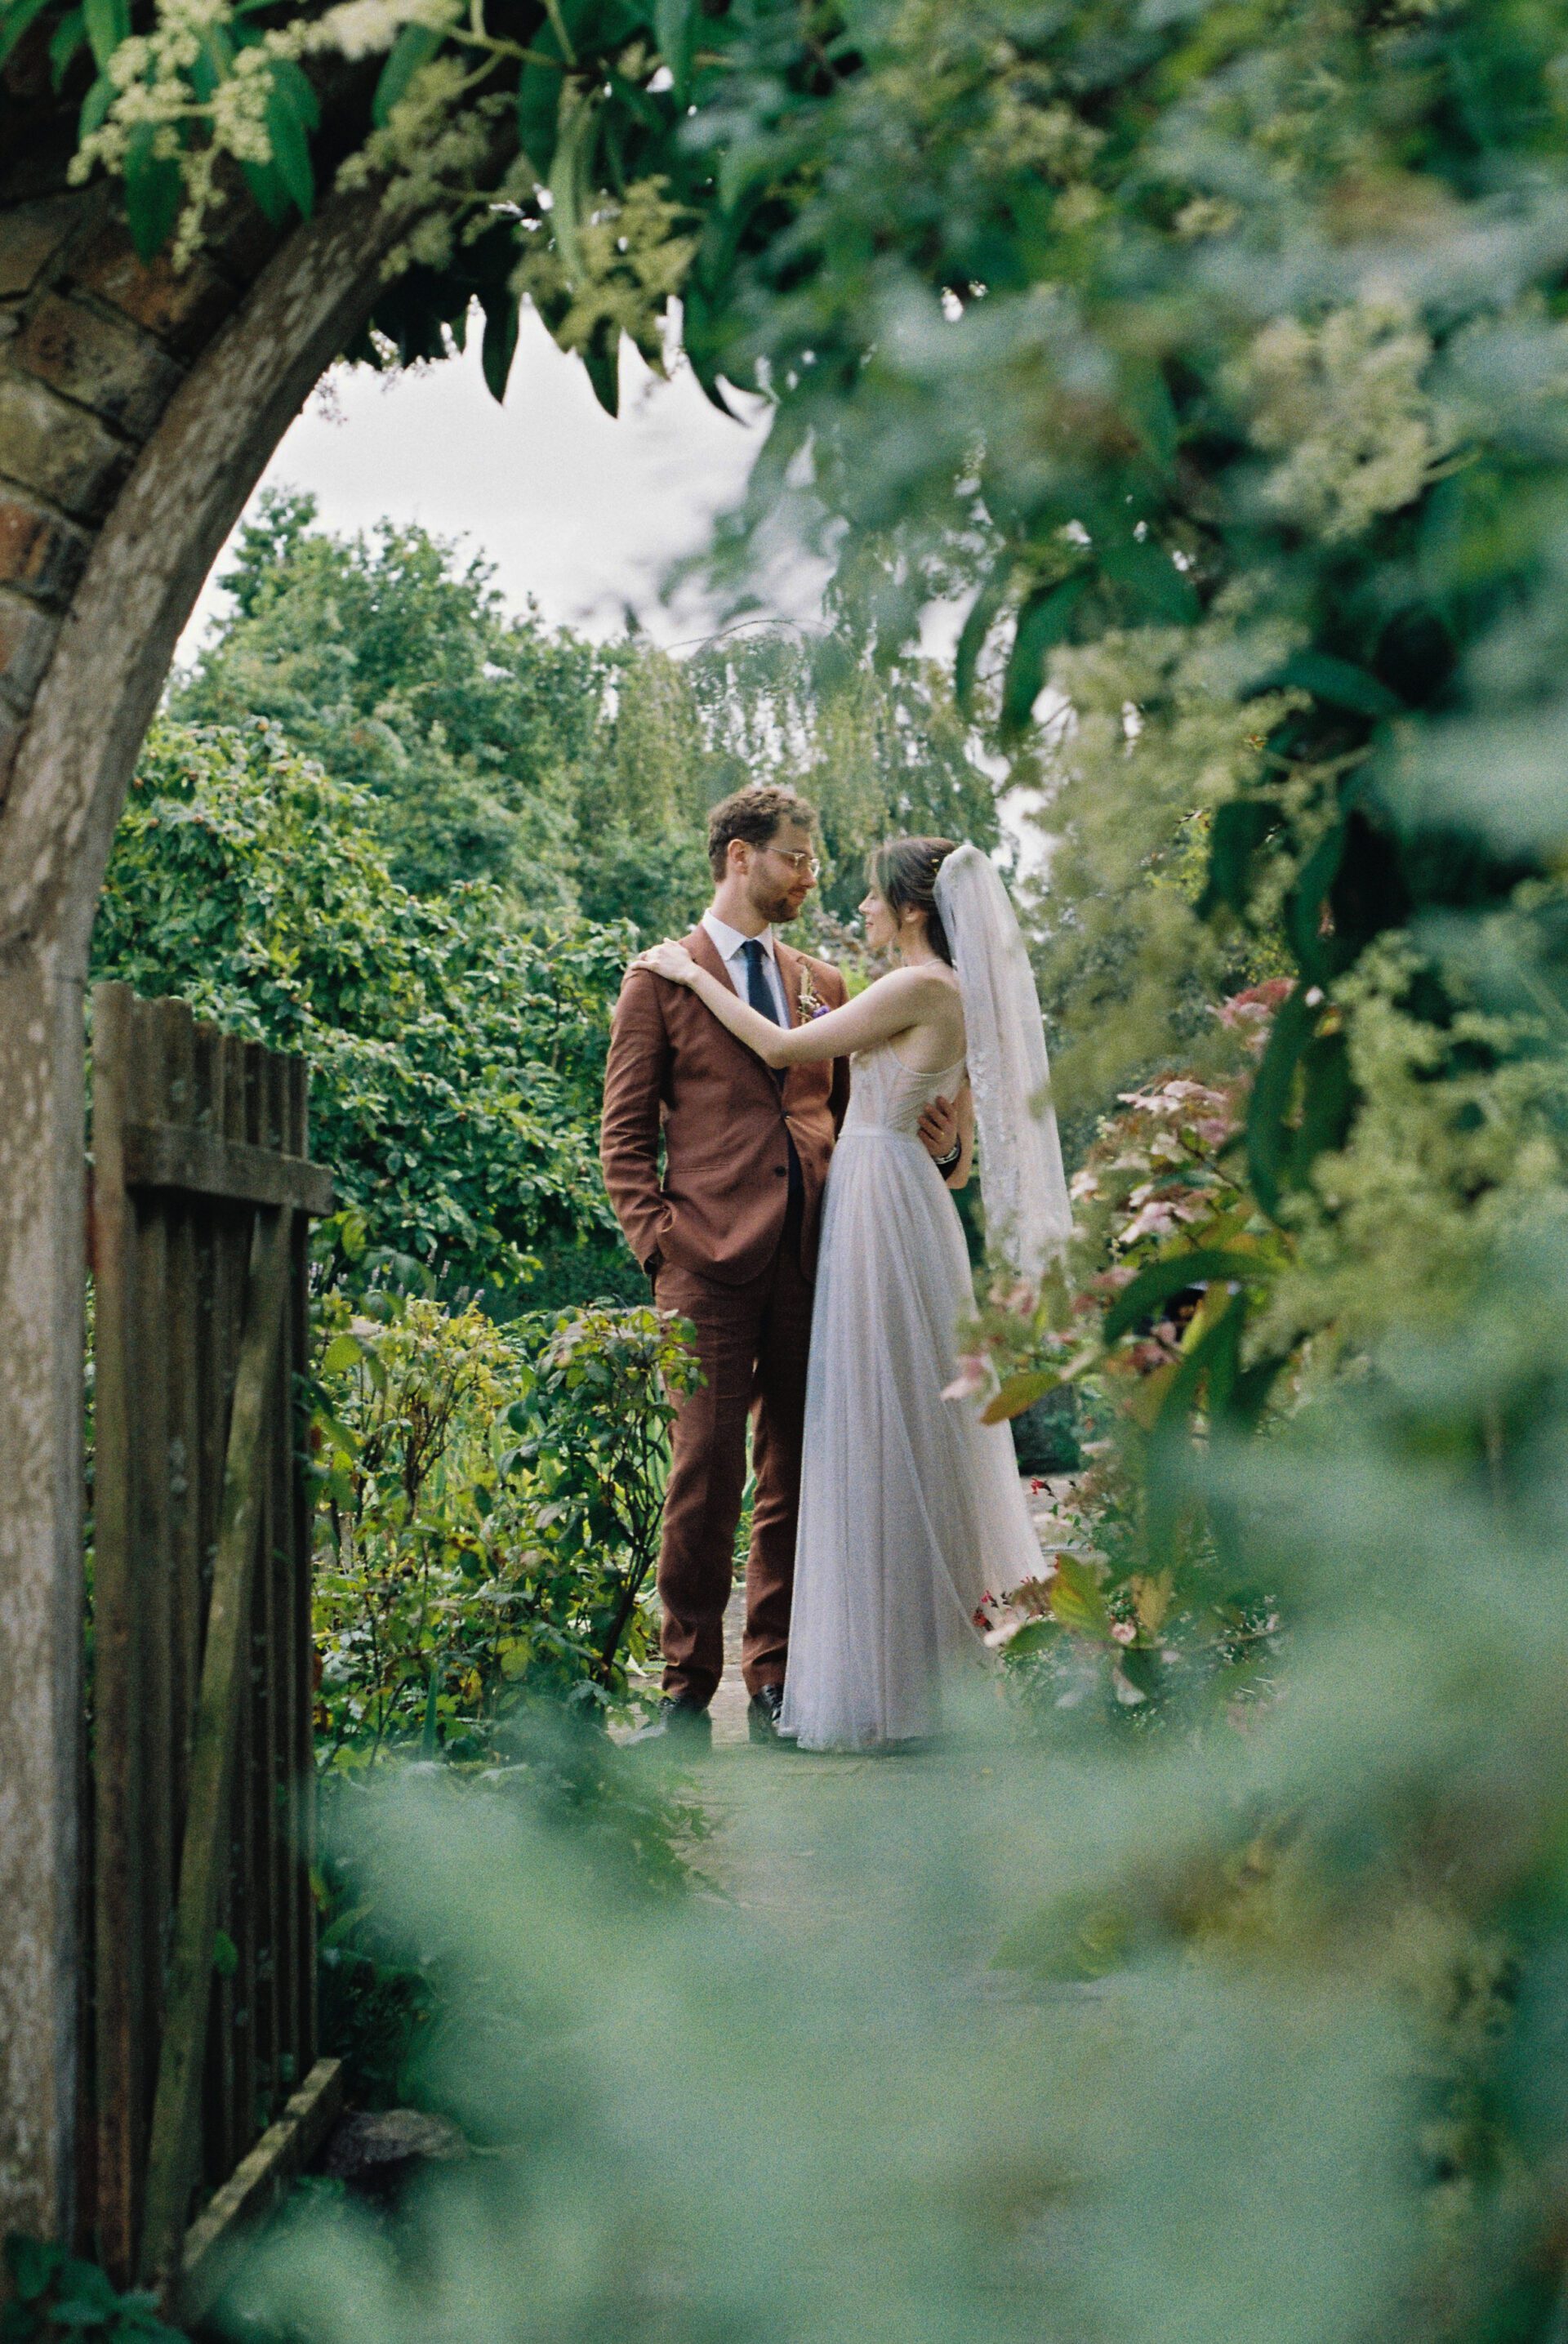 Couples portraits at Gloucestershire wedding venue, captured on 35mm film